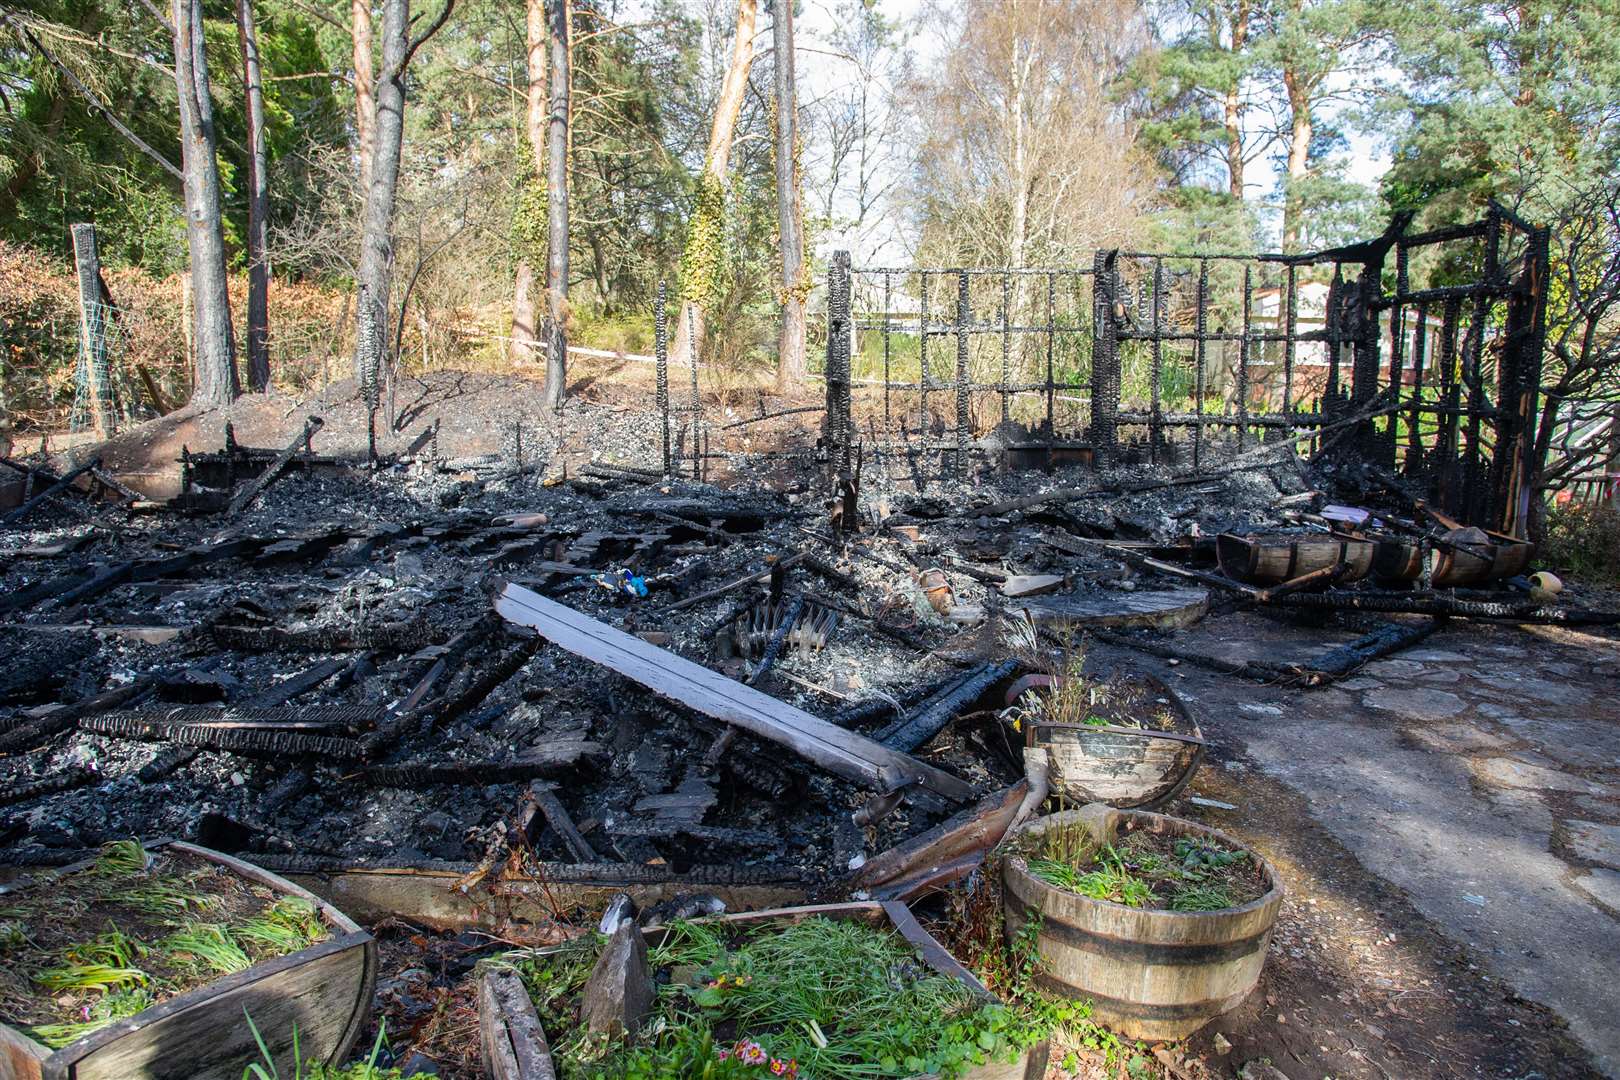 Fire damage at the Findhorn Foundation after the fire in April.